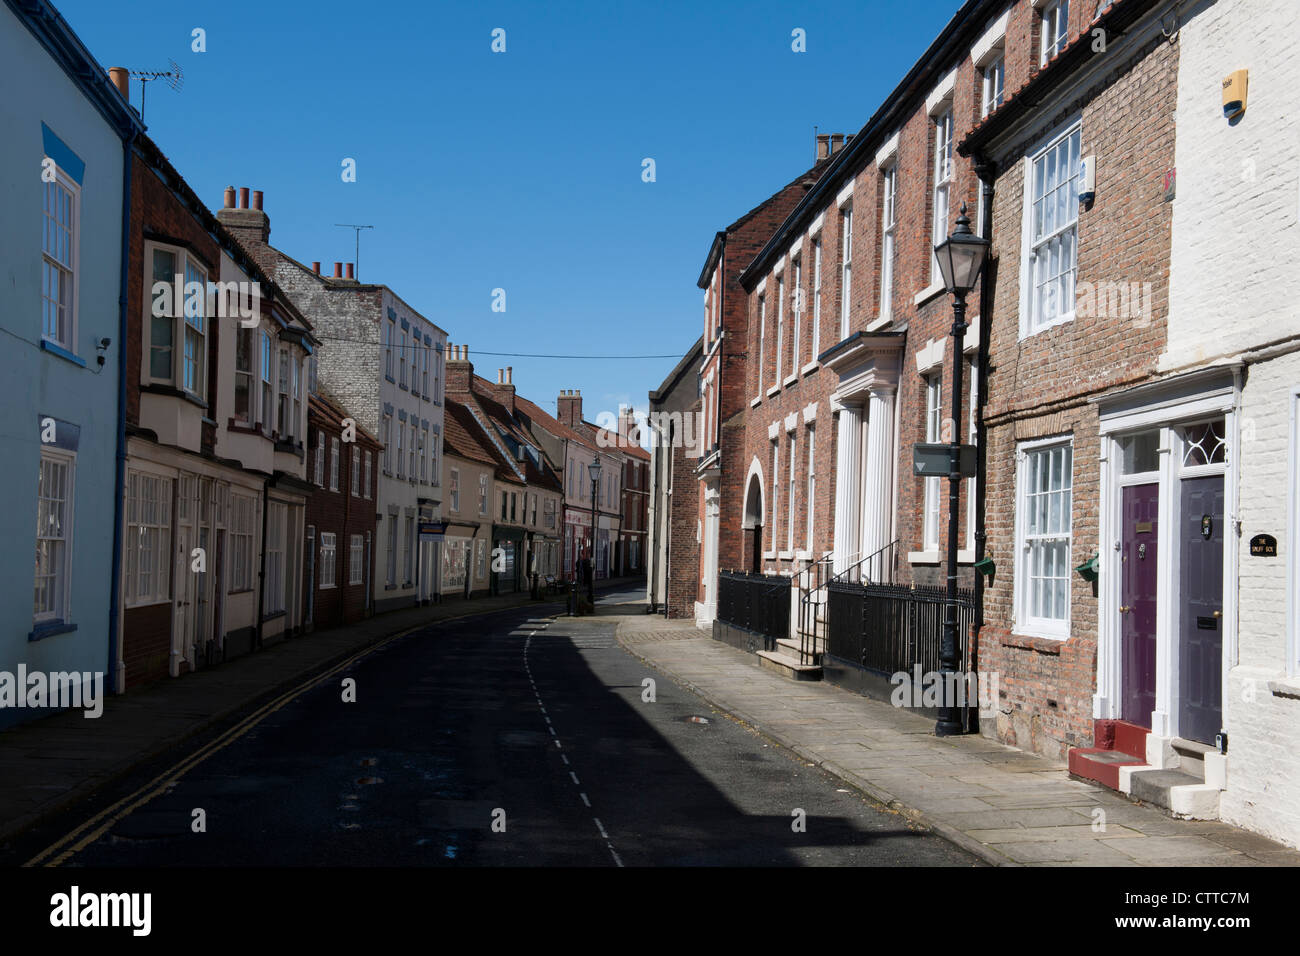 View of High Street, Old Town Bridlington, Bridlington, Yorkshire, England, UK: looking towards Westgate from Eastgate. Stock Photo